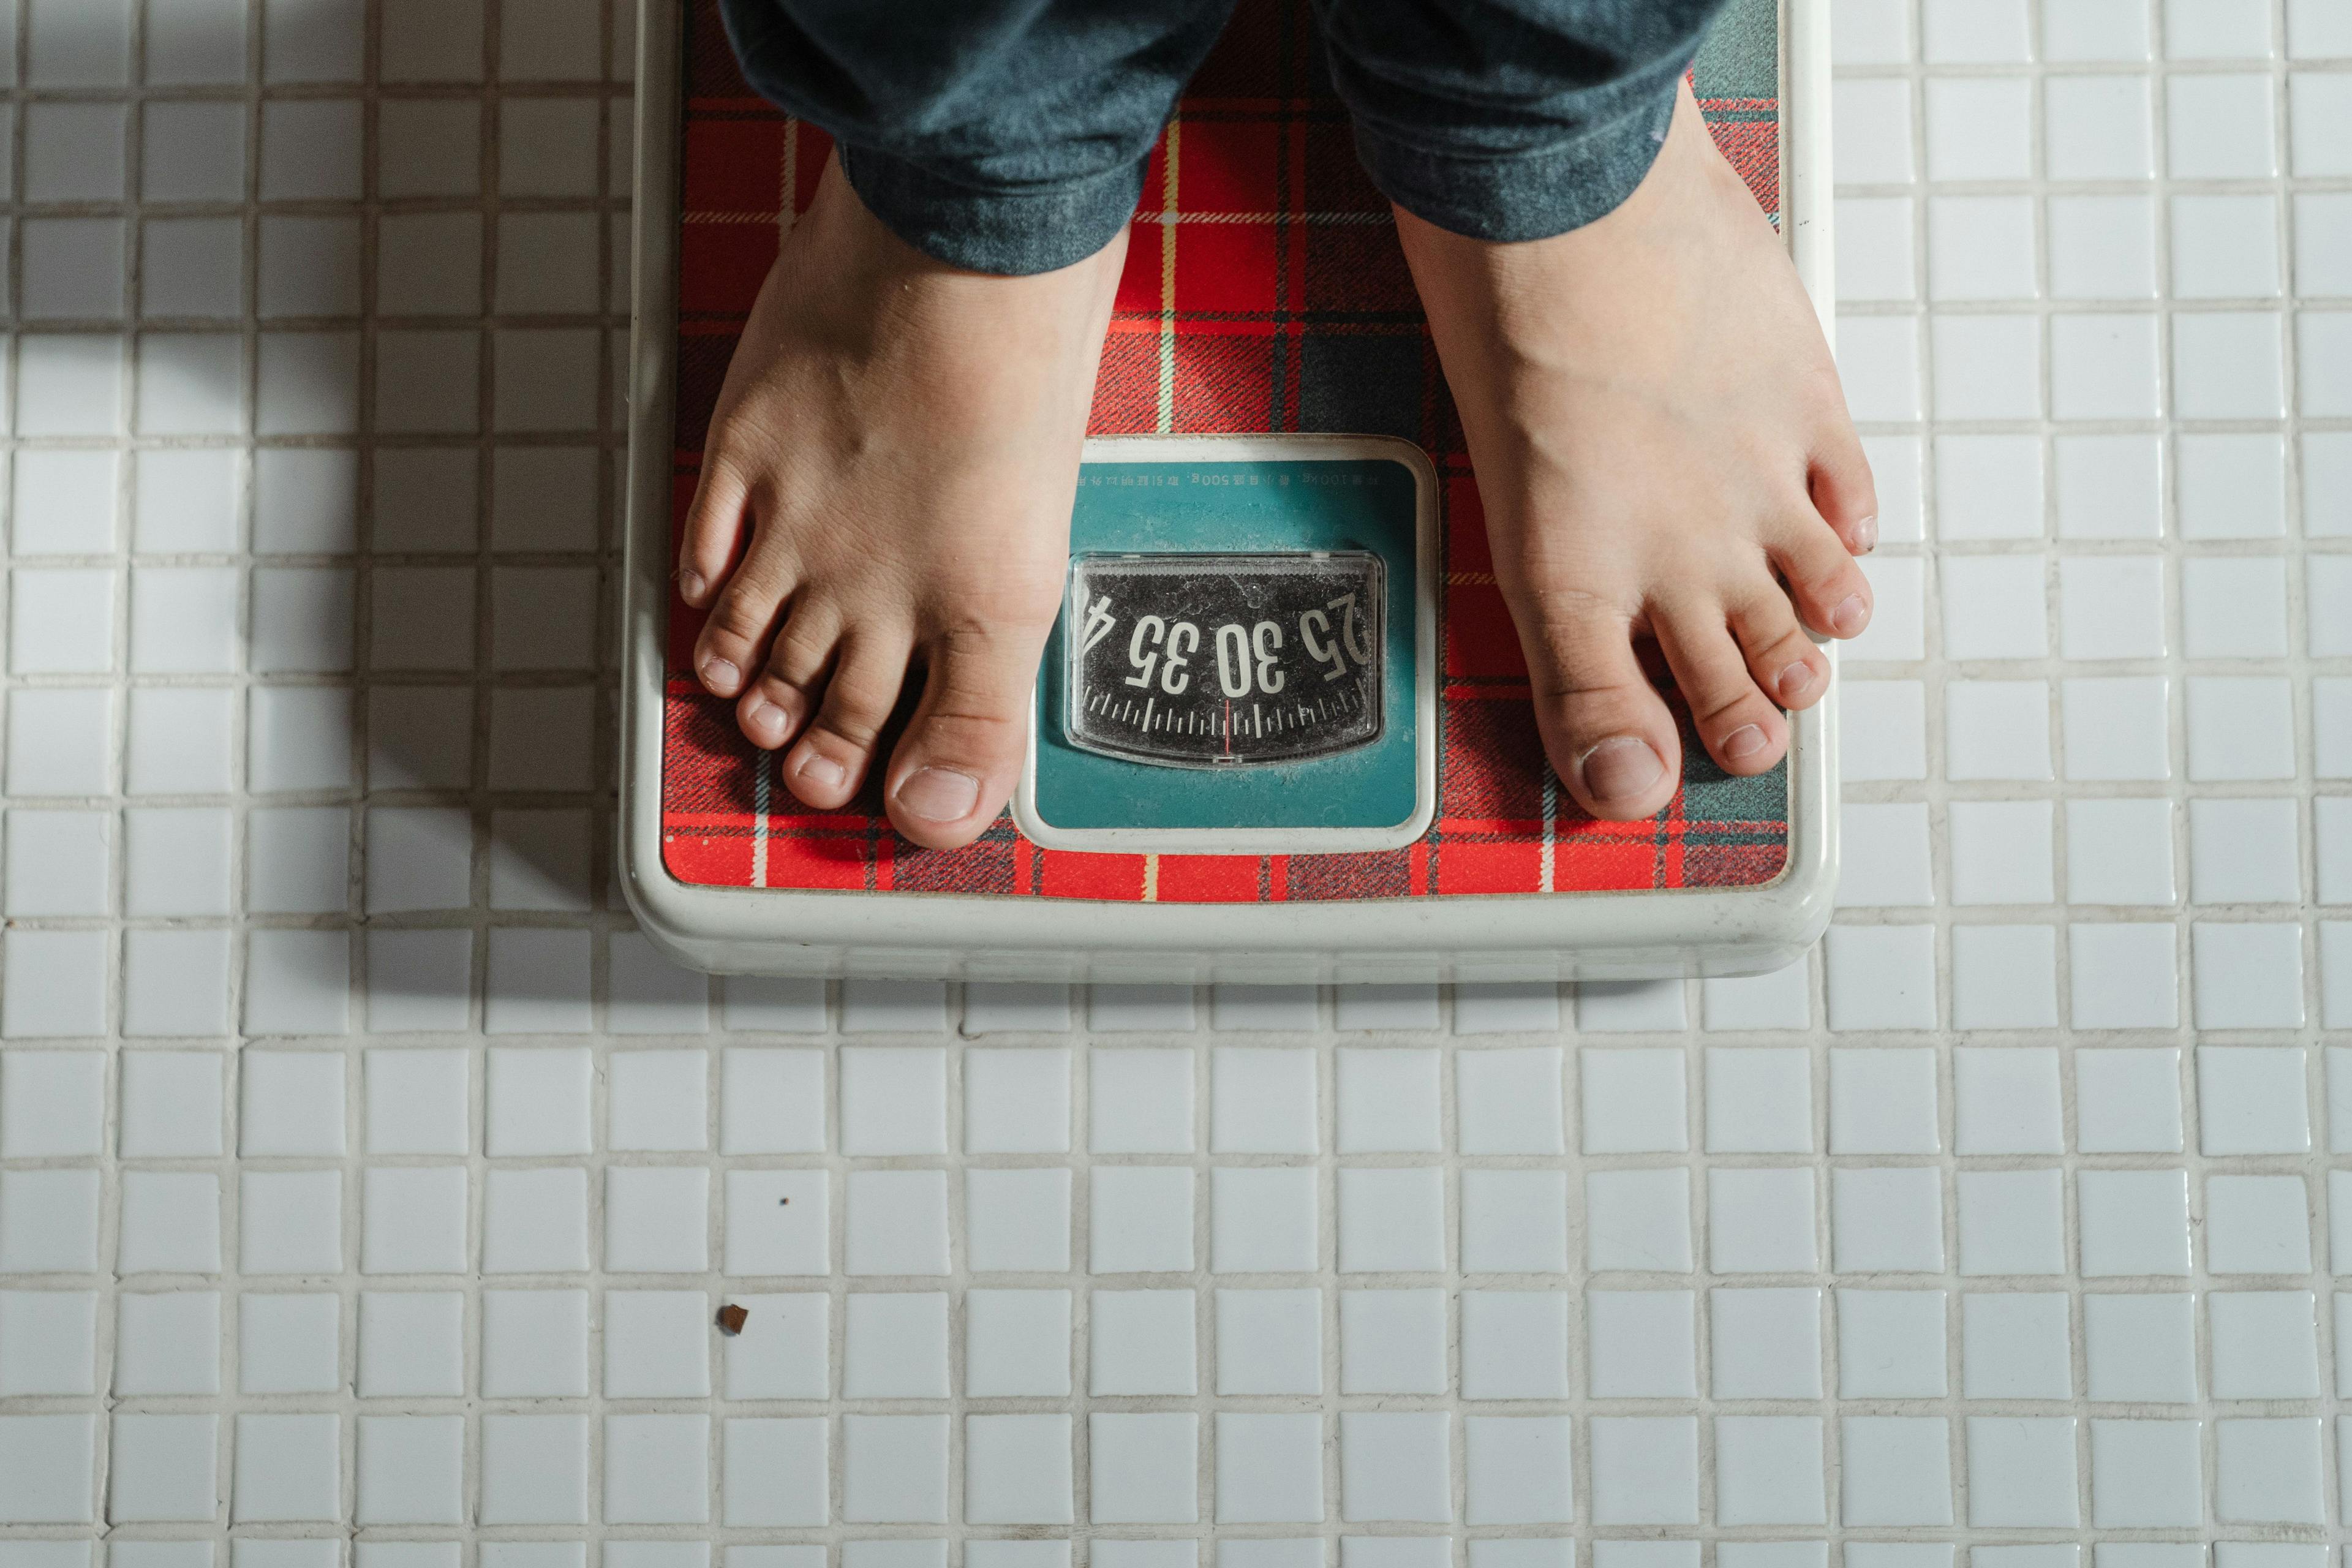 Obesity, Overweight Individuals at a Heightened Risk of Colorectal Cancer